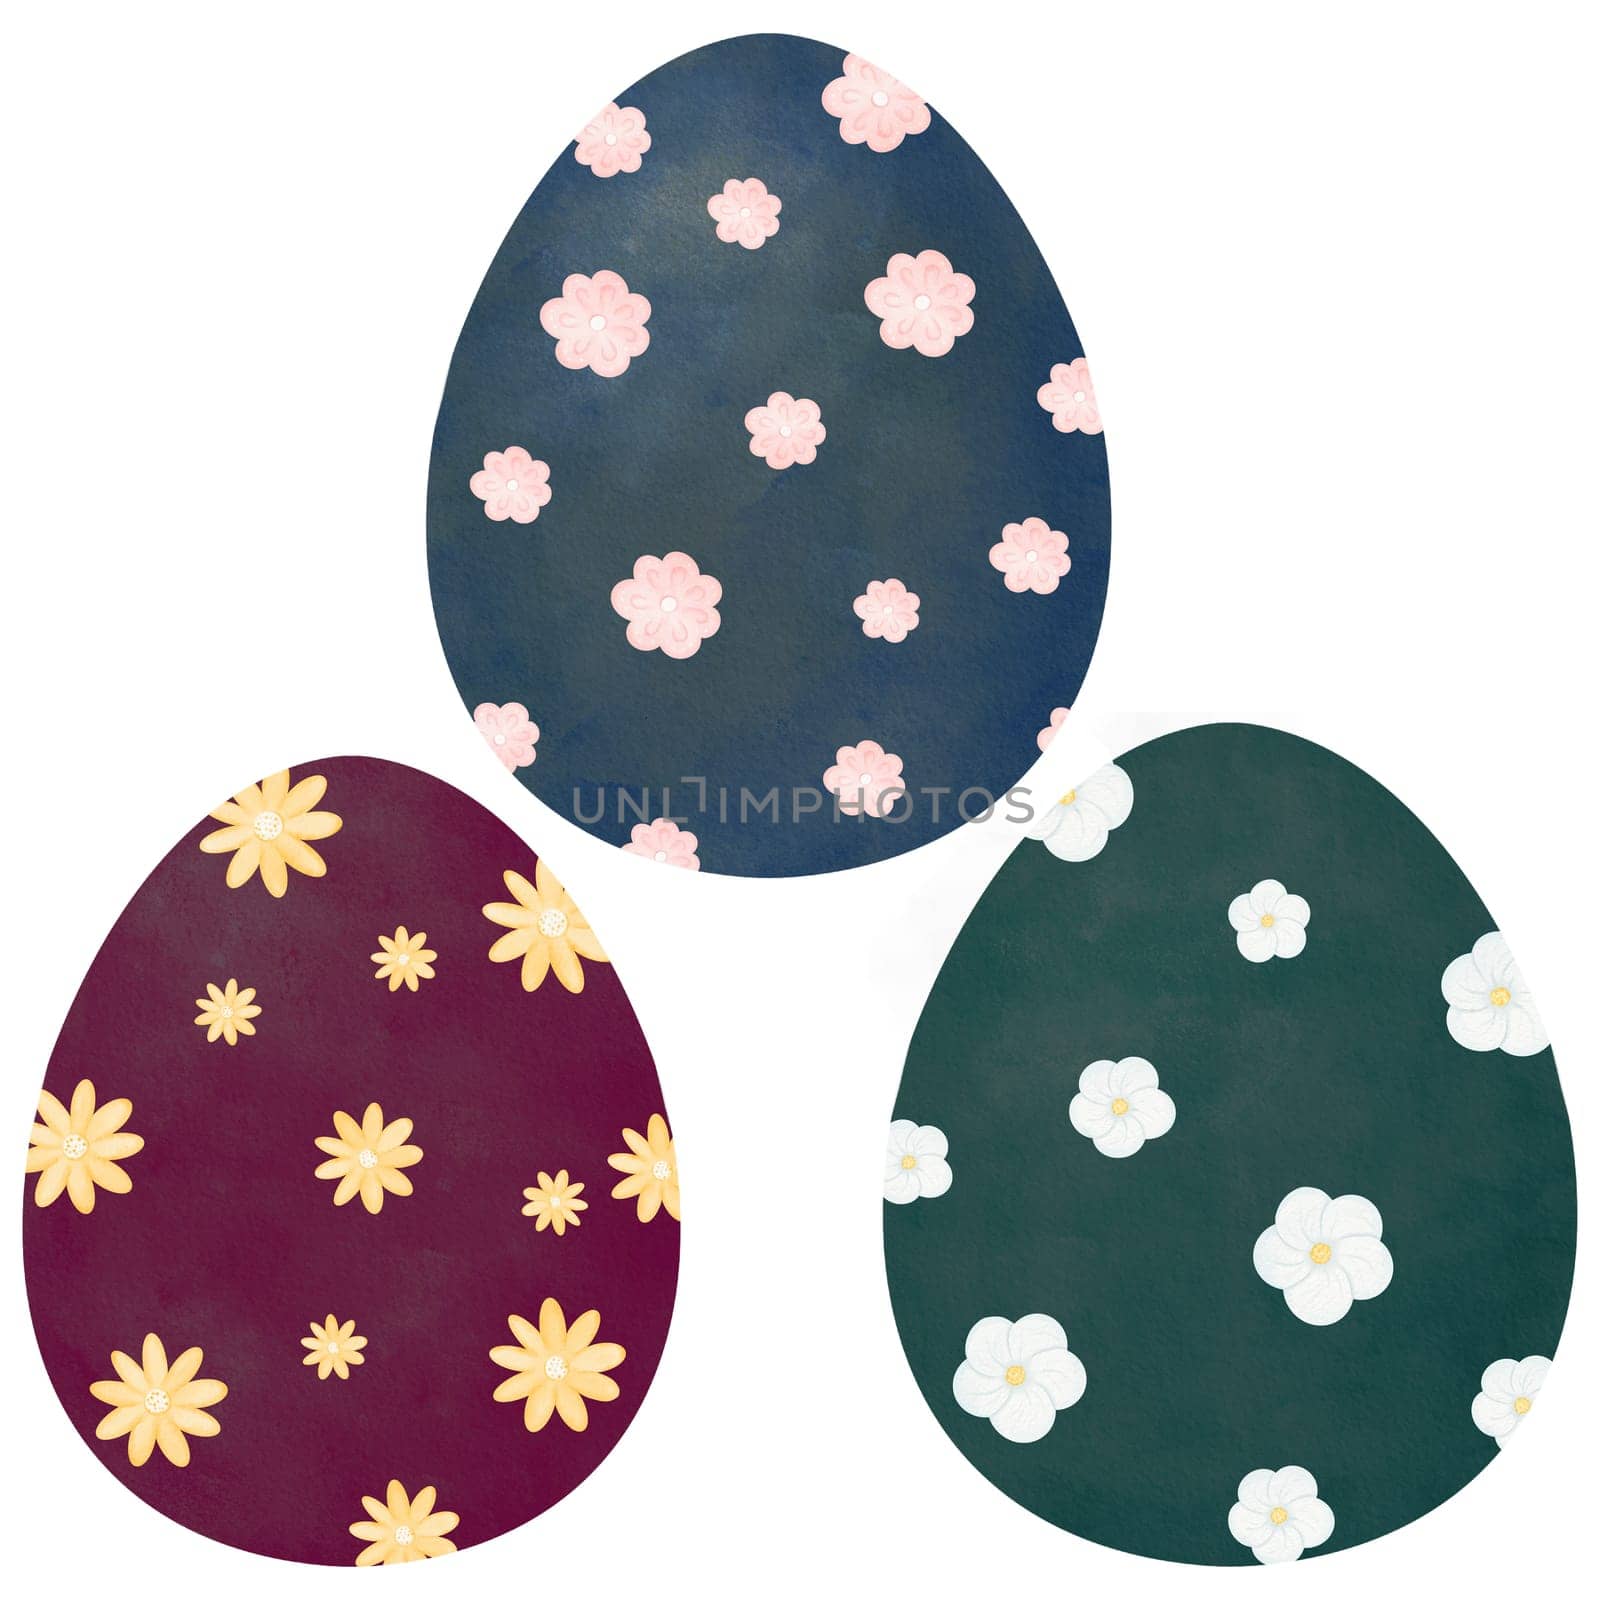 Set of dark watercolor eggs adorned with flowers. A versatile collection for adding an artistic and floral touch to various creative projects, including textiles, posters, invitations, and more by Art_Mari_Ka